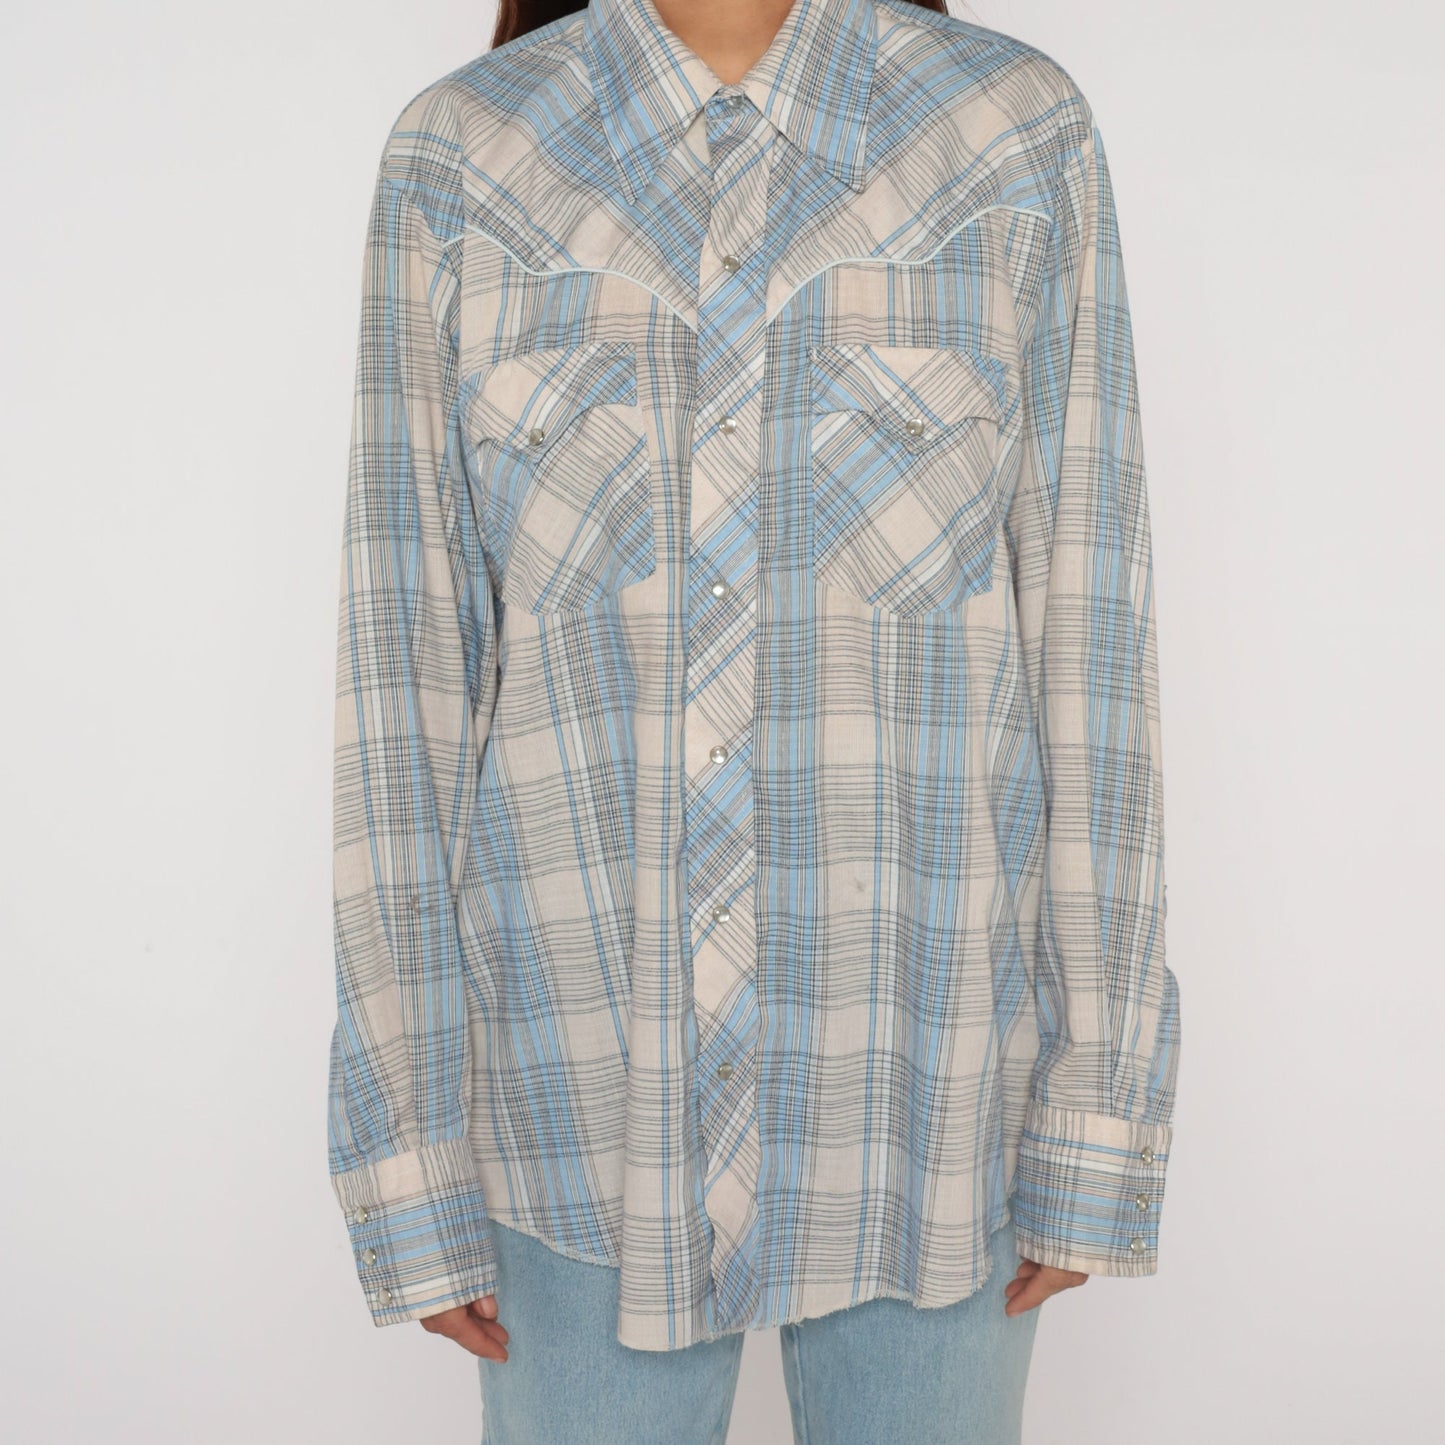 Plaid Western Shirt 80s Button Up Pearl Snap Shirt Collared Rodeo Cowgirl Long Sleeve Cowboy Blue Vintage 1980s Karman JC Penney Men's Large